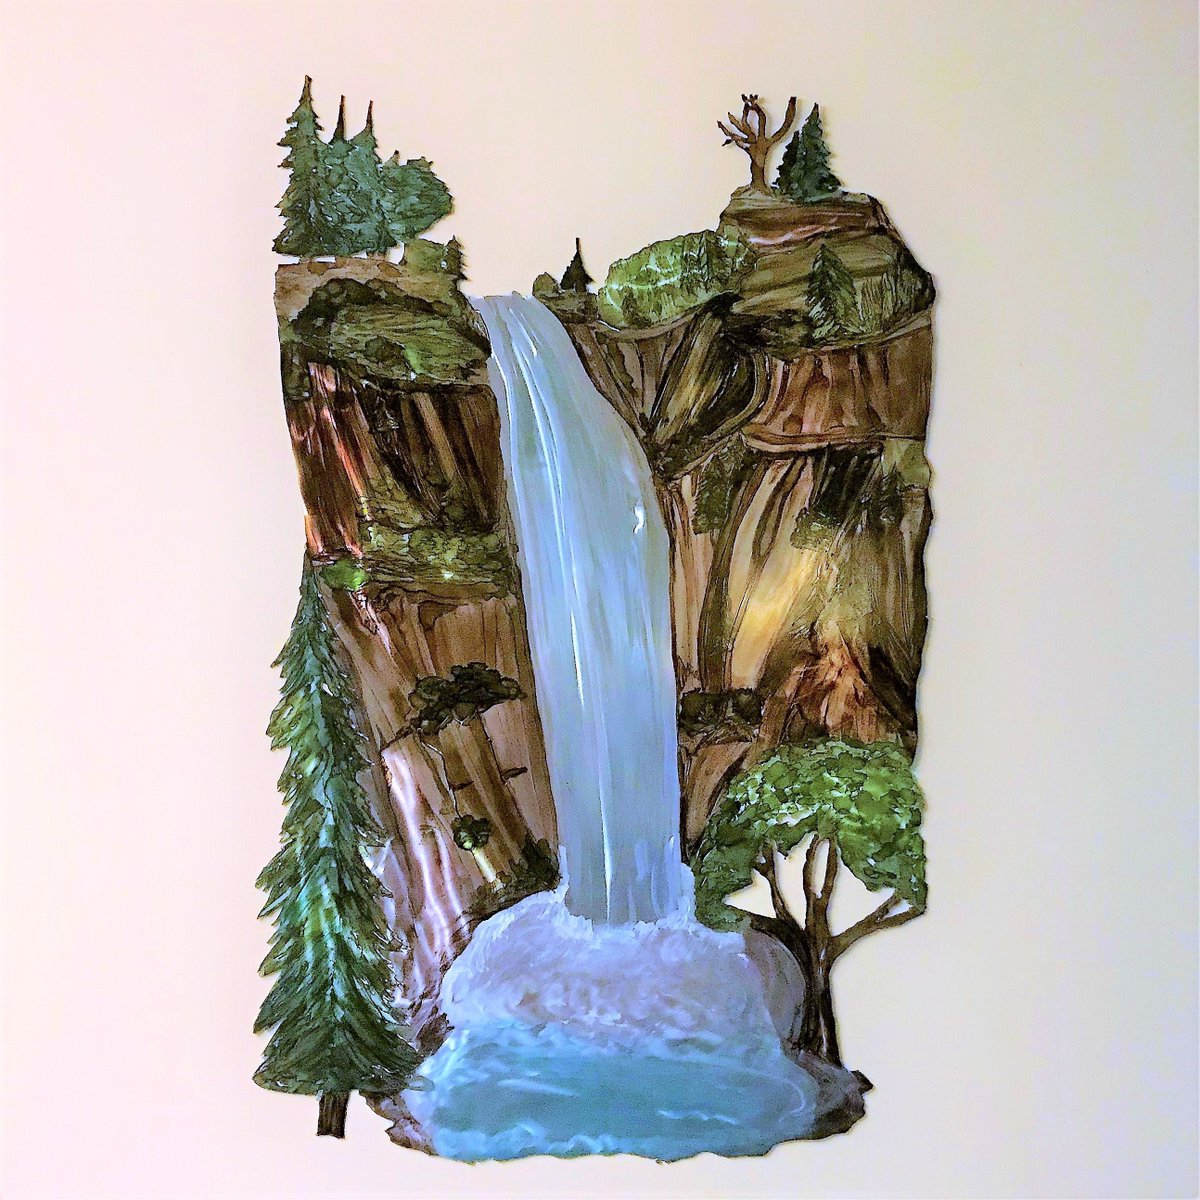 Excited to share the latest addition to my #etsy shop: Spring Is Falling another very large piece etsy.me/2HiKbyw #art #pacificnorthwest #kitsap #supportlocal #waterfall #mountain #metalart #steelart #womenin #metalwallhanging #love